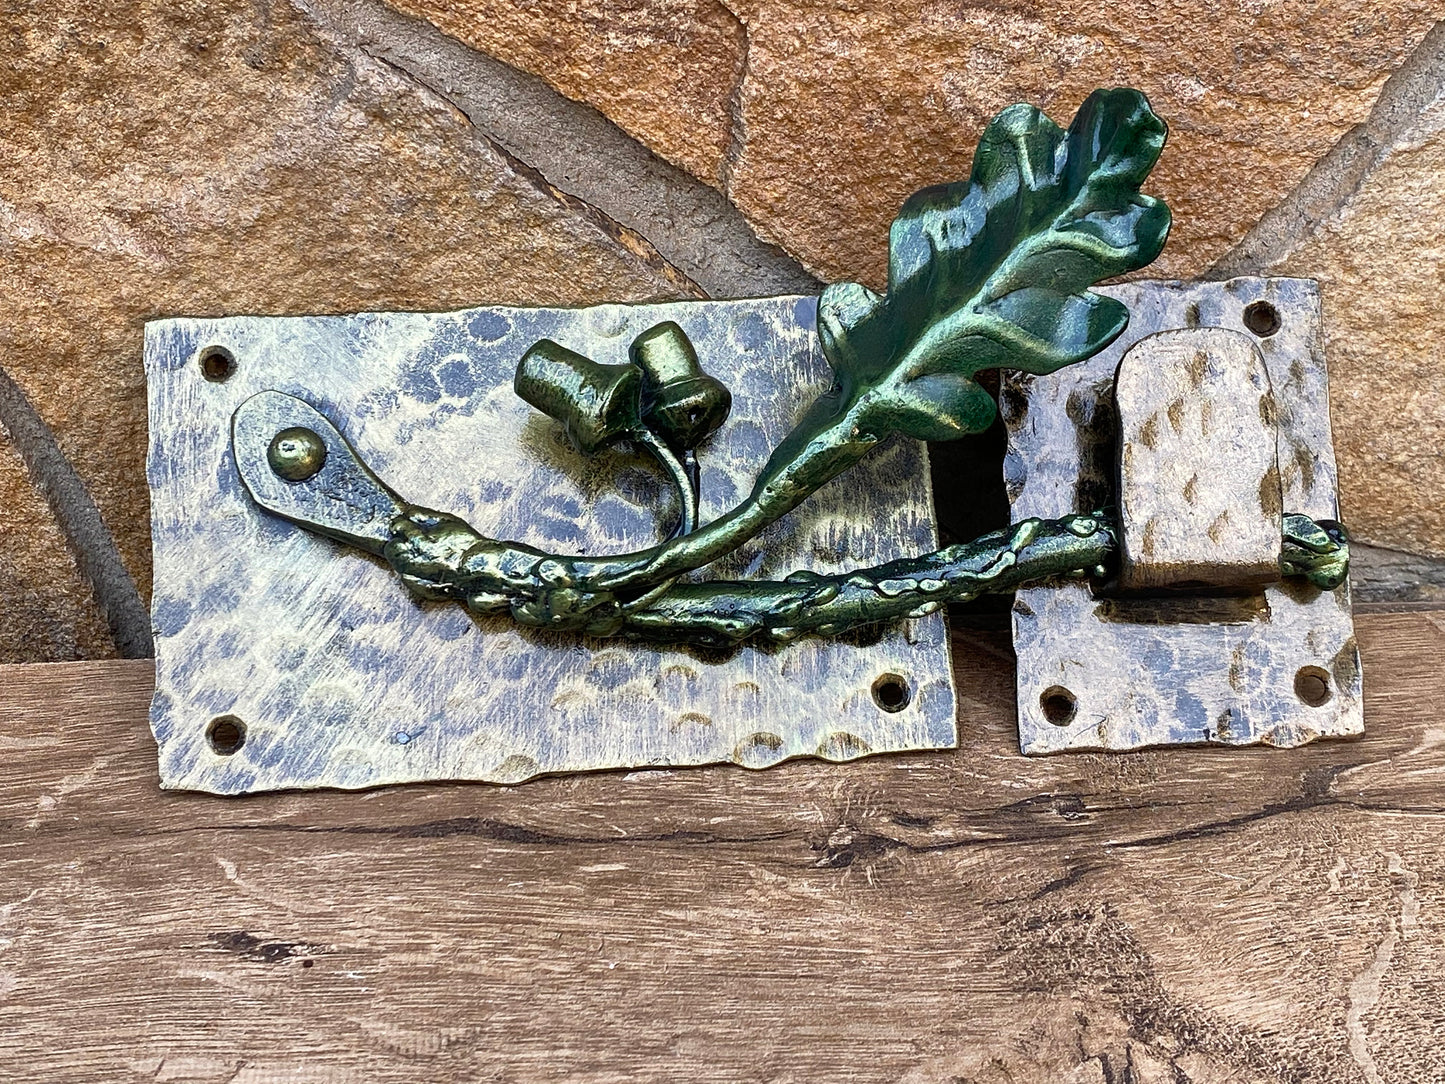 Latch, gift for mother, gate latch, lawn sign, Christmas, yard decor, garden decor, barn door latch, hardware, puzzle, wreath, craft kit